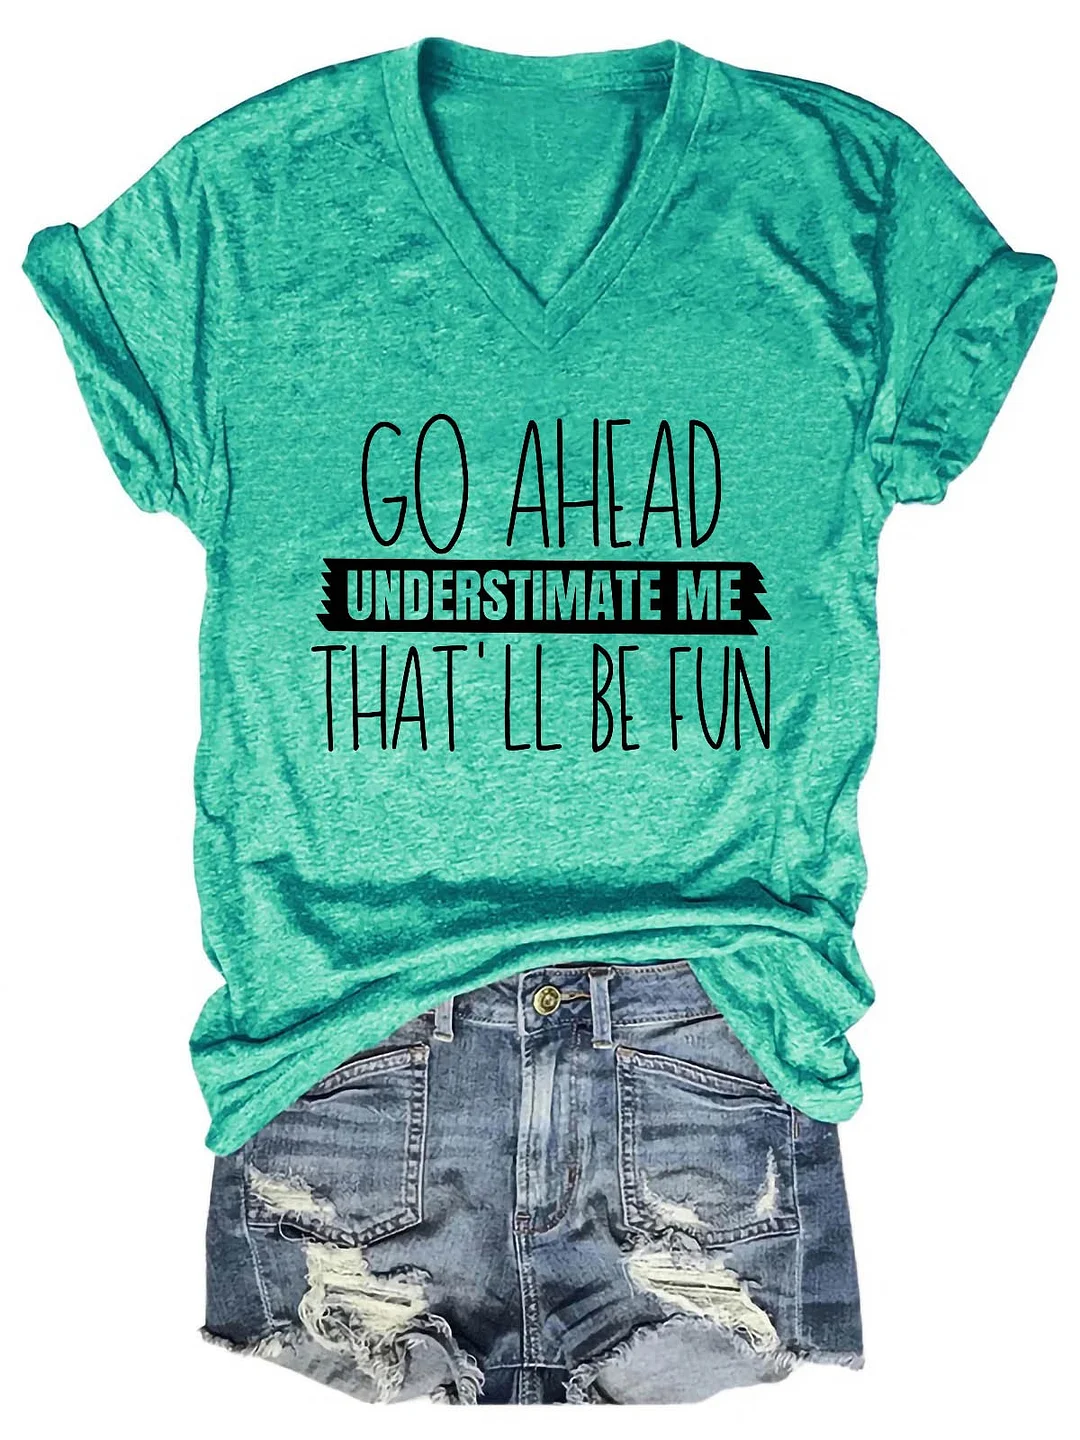 Women's Go Ahead Understimate Me That'll All Be Fun V-Neck T-Shirt